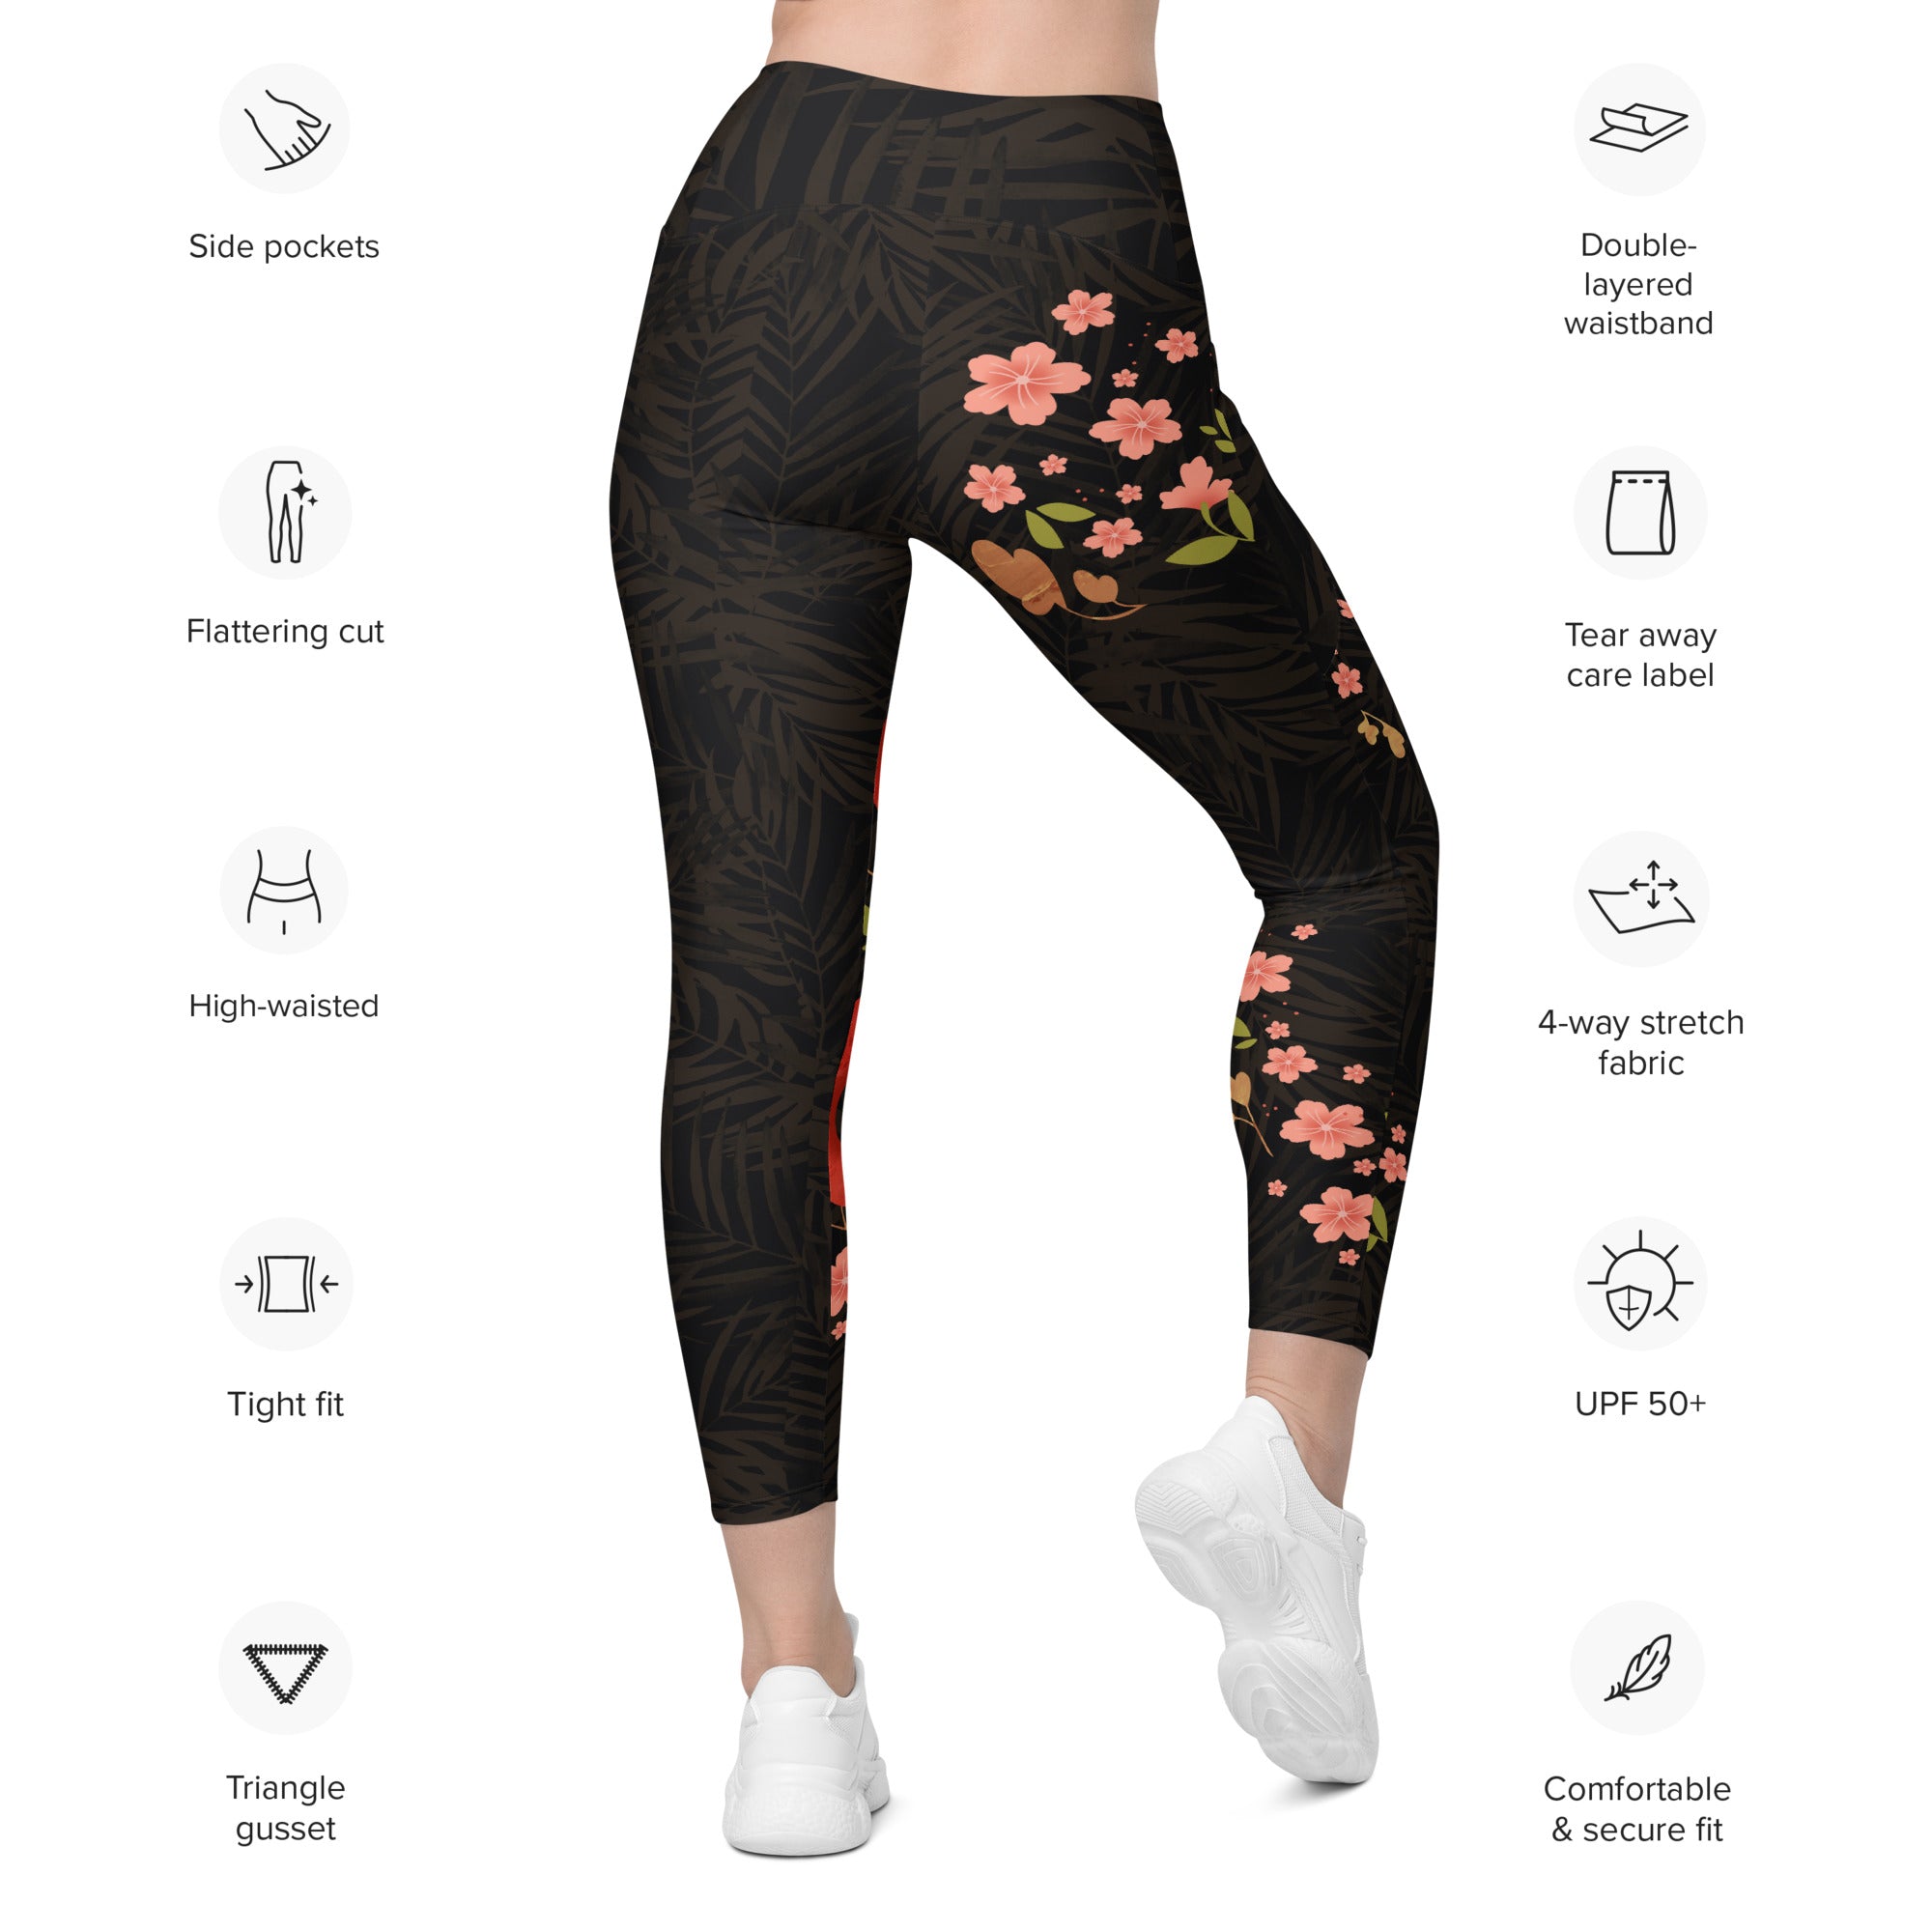 Snakes & Flowers Leggings With Pockets